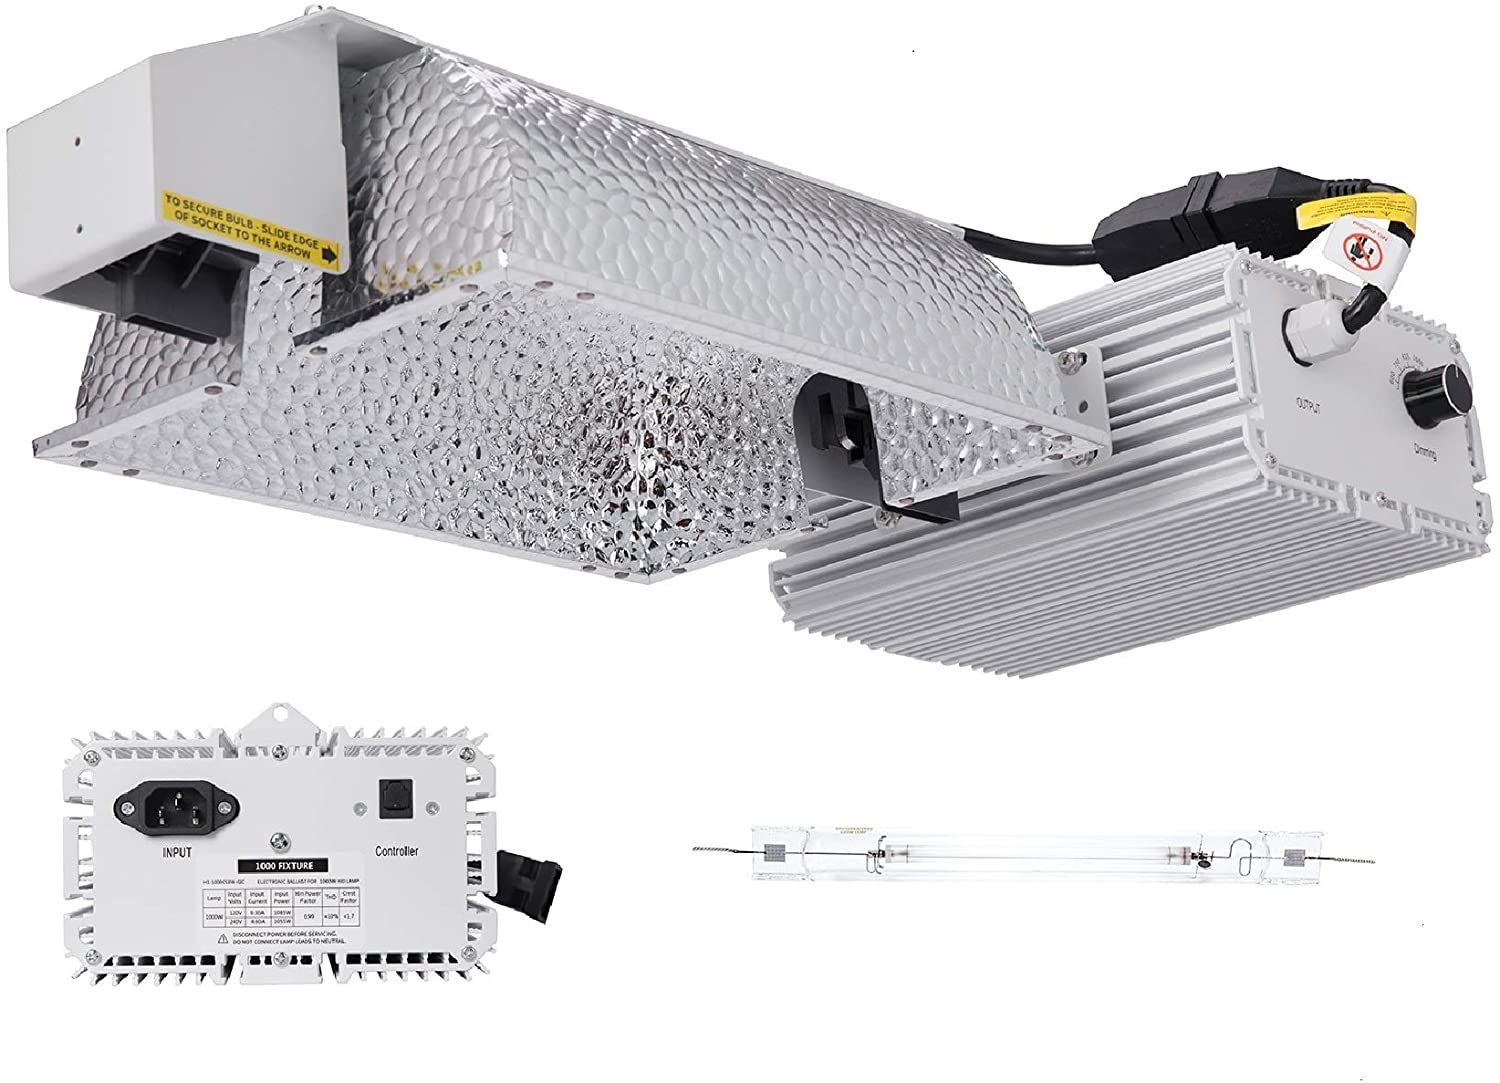 Raylux 1000 Watt DE HID Grow Light System Kit with Controller Port, Closed Style Reflector with 120-240V Digital Dimmable Ballast